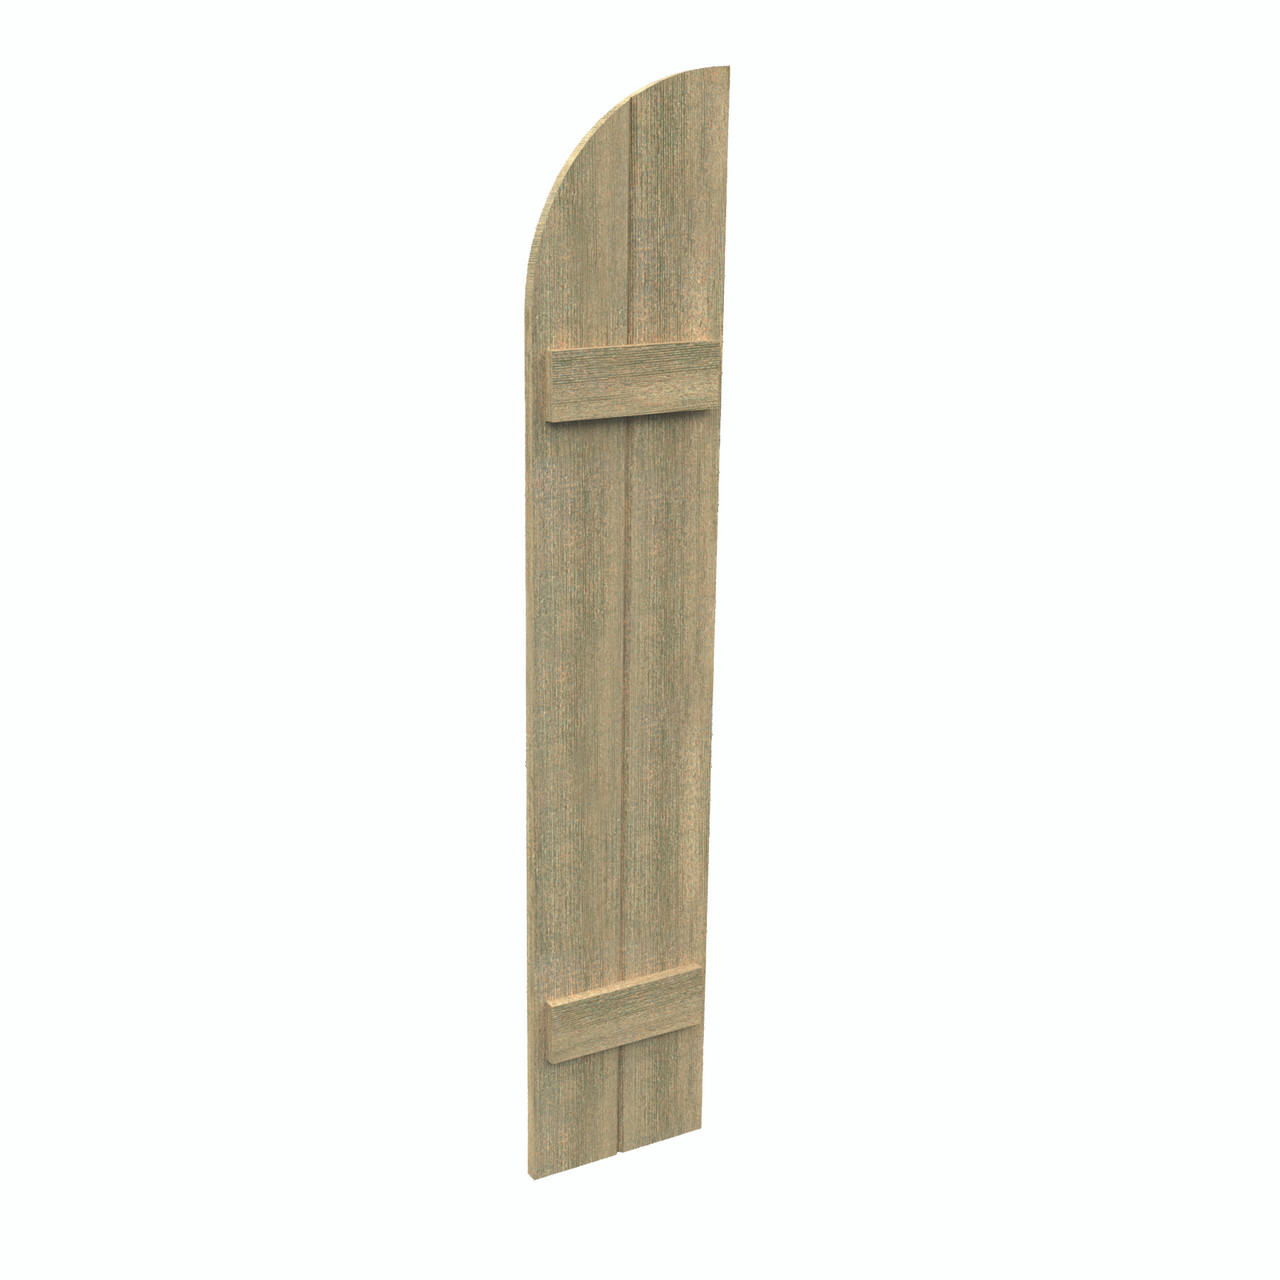 12 inch by 24 inch Quarter Round Shutter with 2-Boards